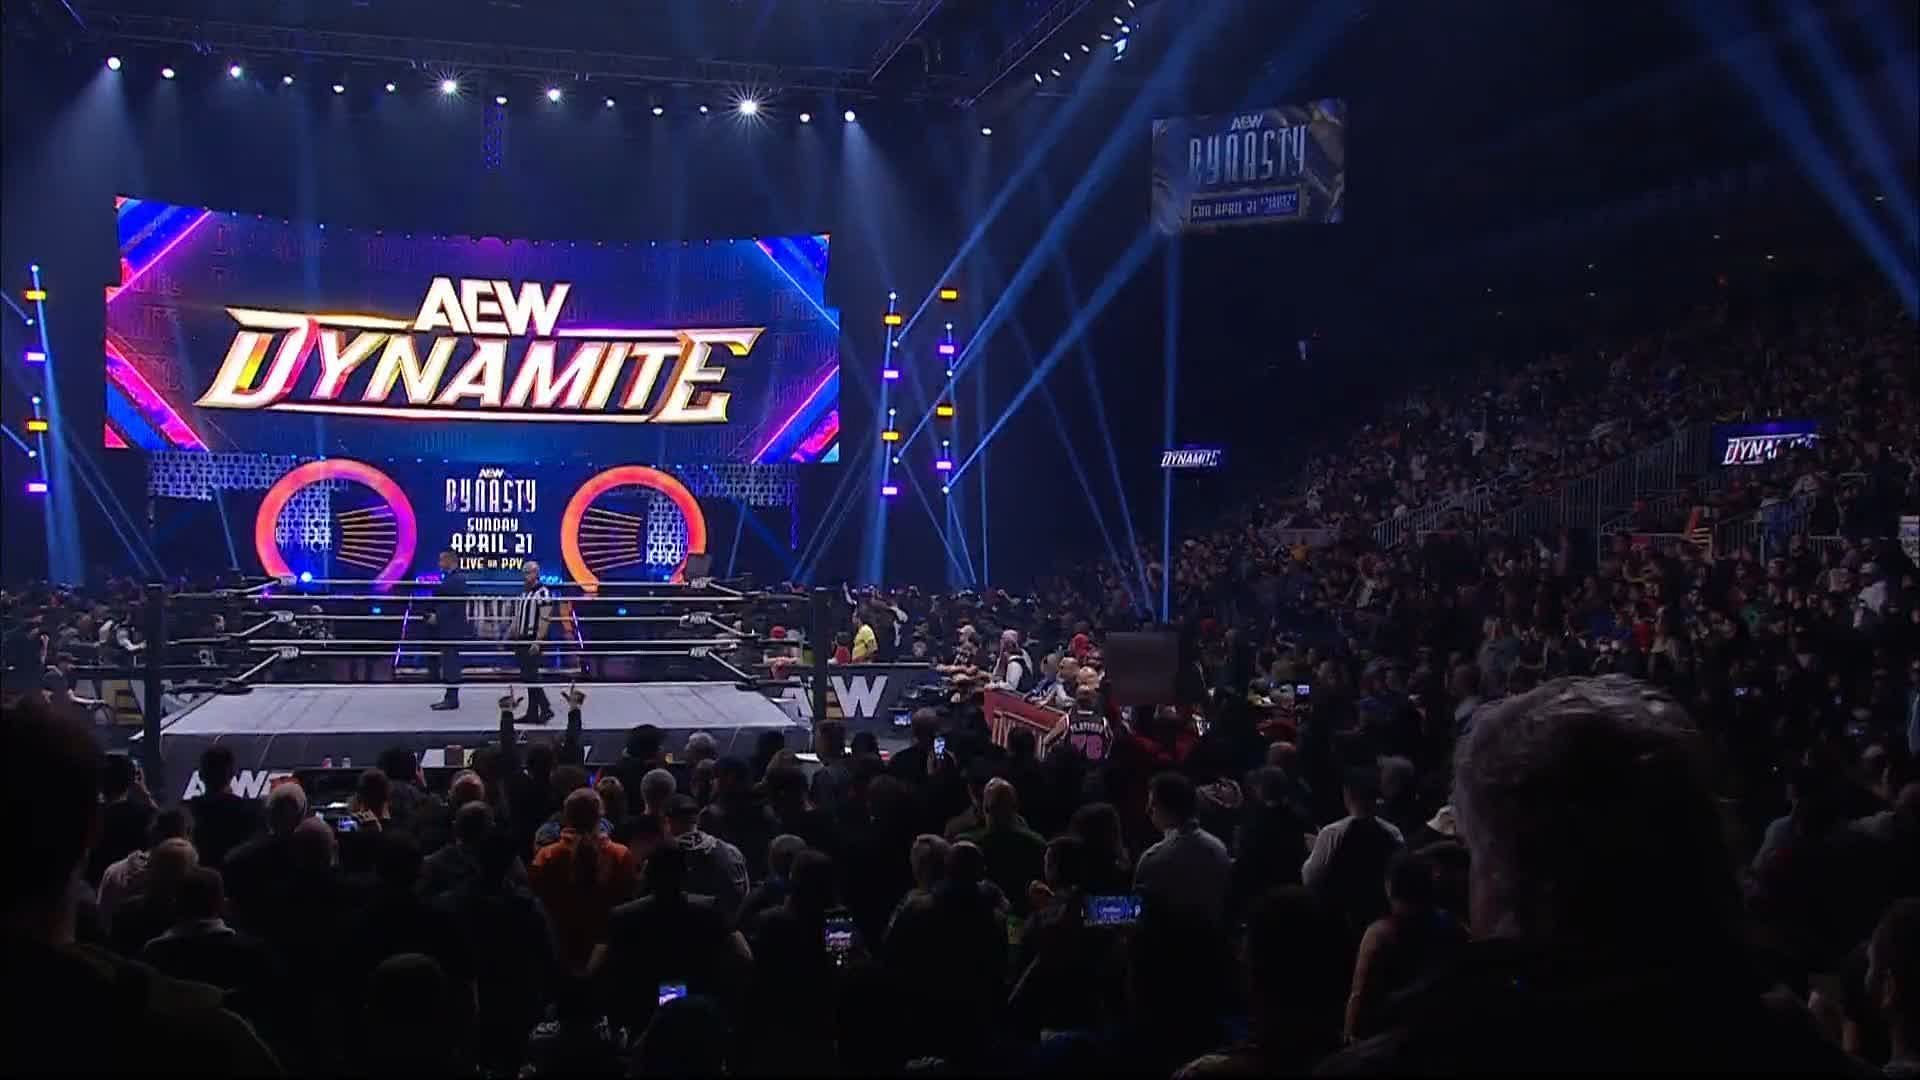 AEW fans pack their local arena for a live Dynamite episode